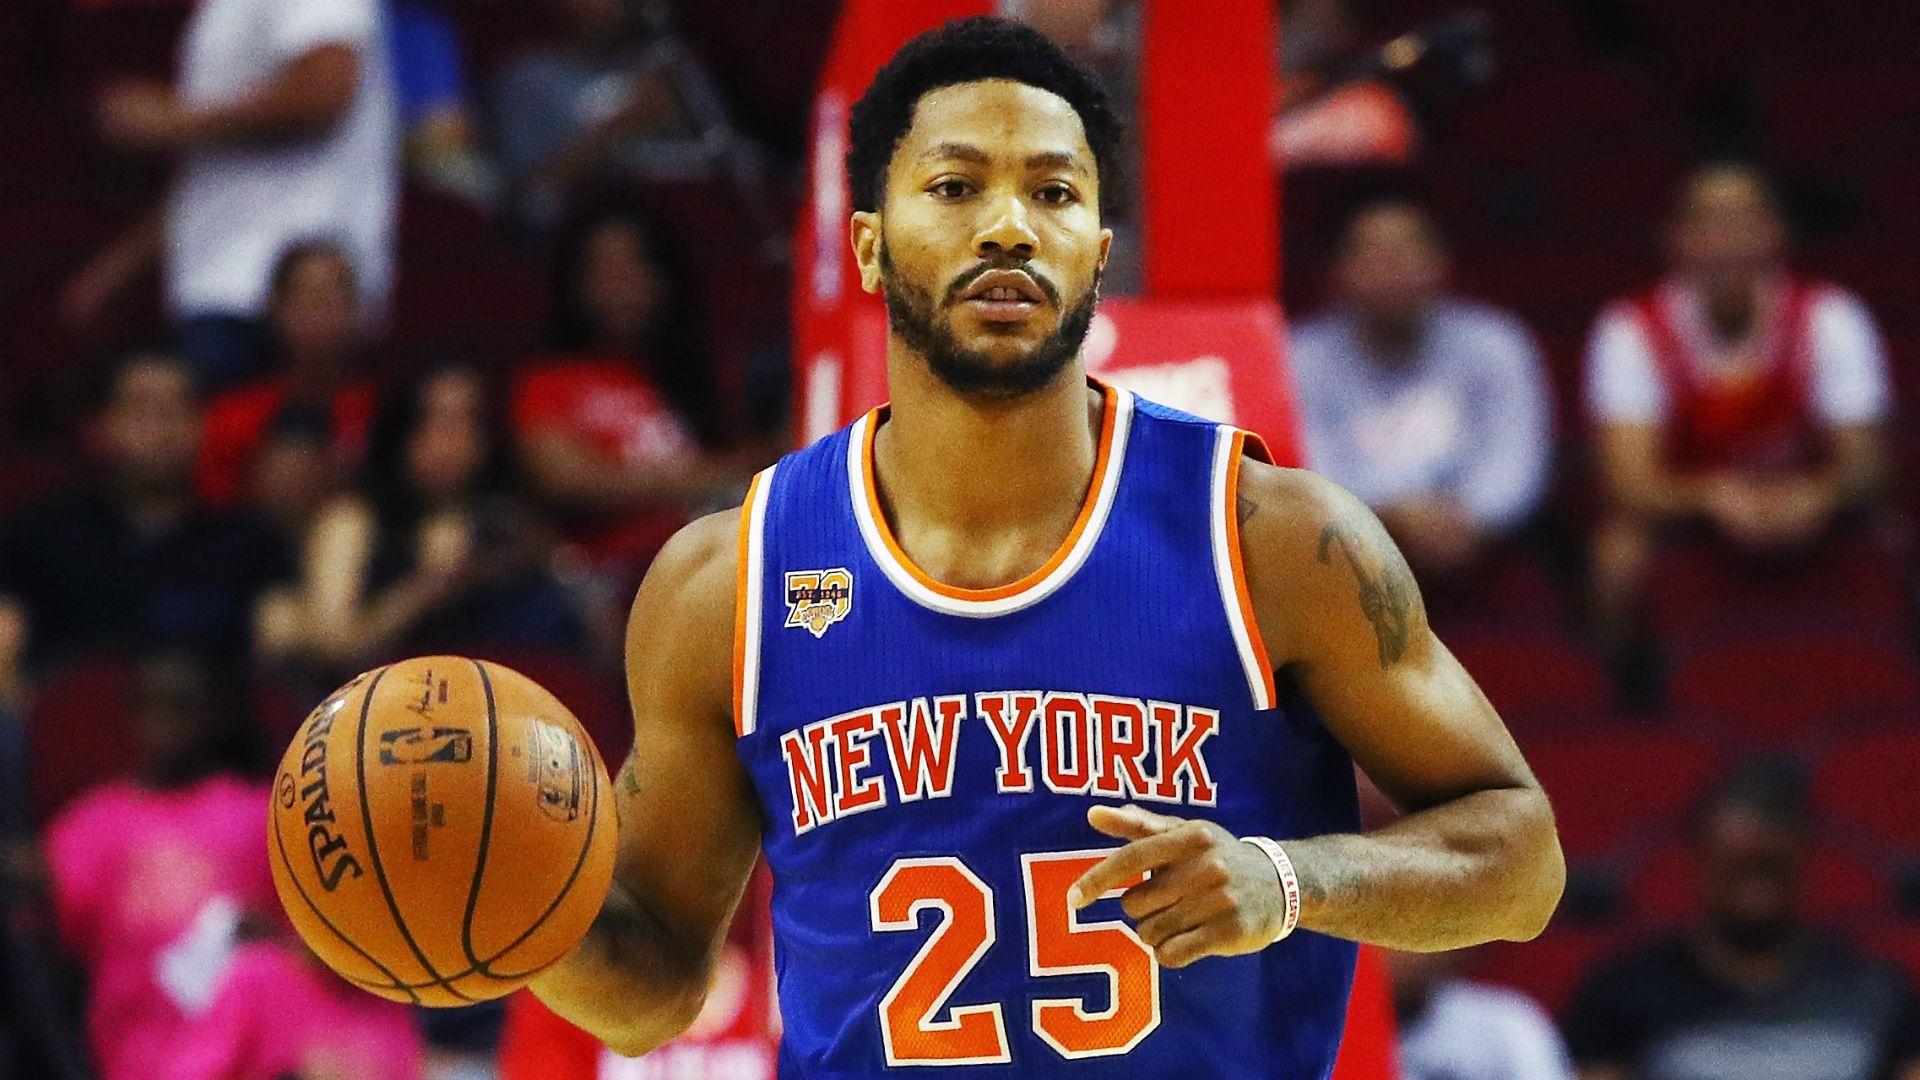 Derrick Rose brought to tears by video from his fans in China. NBA